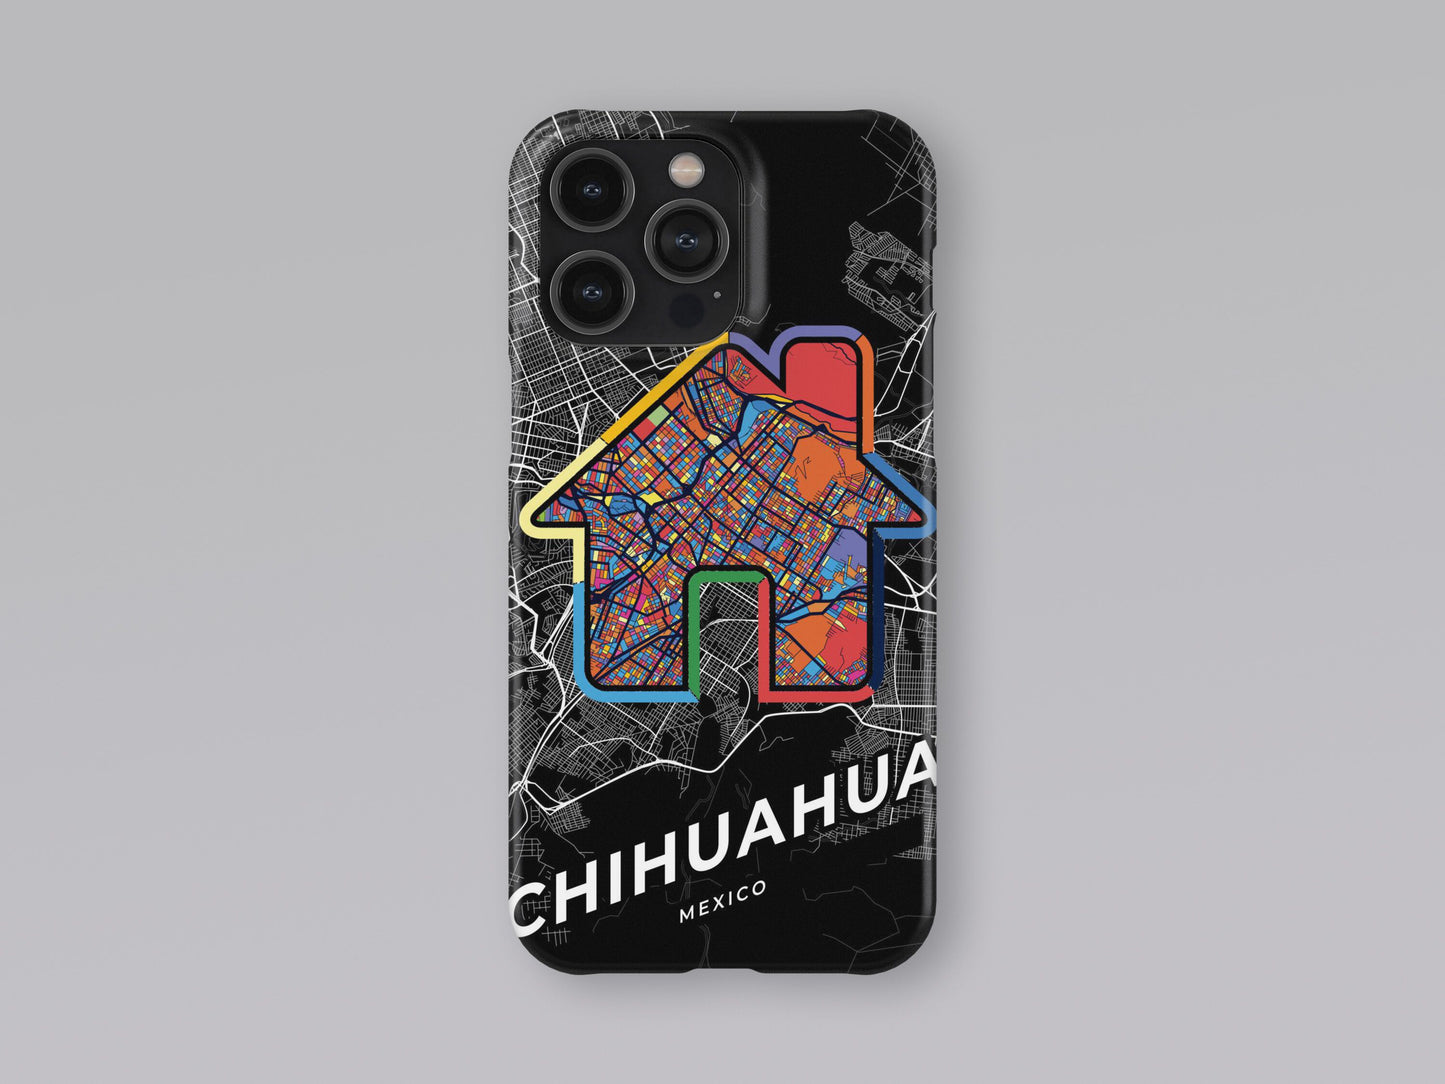 Chihuahua Mexico slim phone case with colorful icon. Birthday, wedding or housewarming gift. Couple match cases. 3